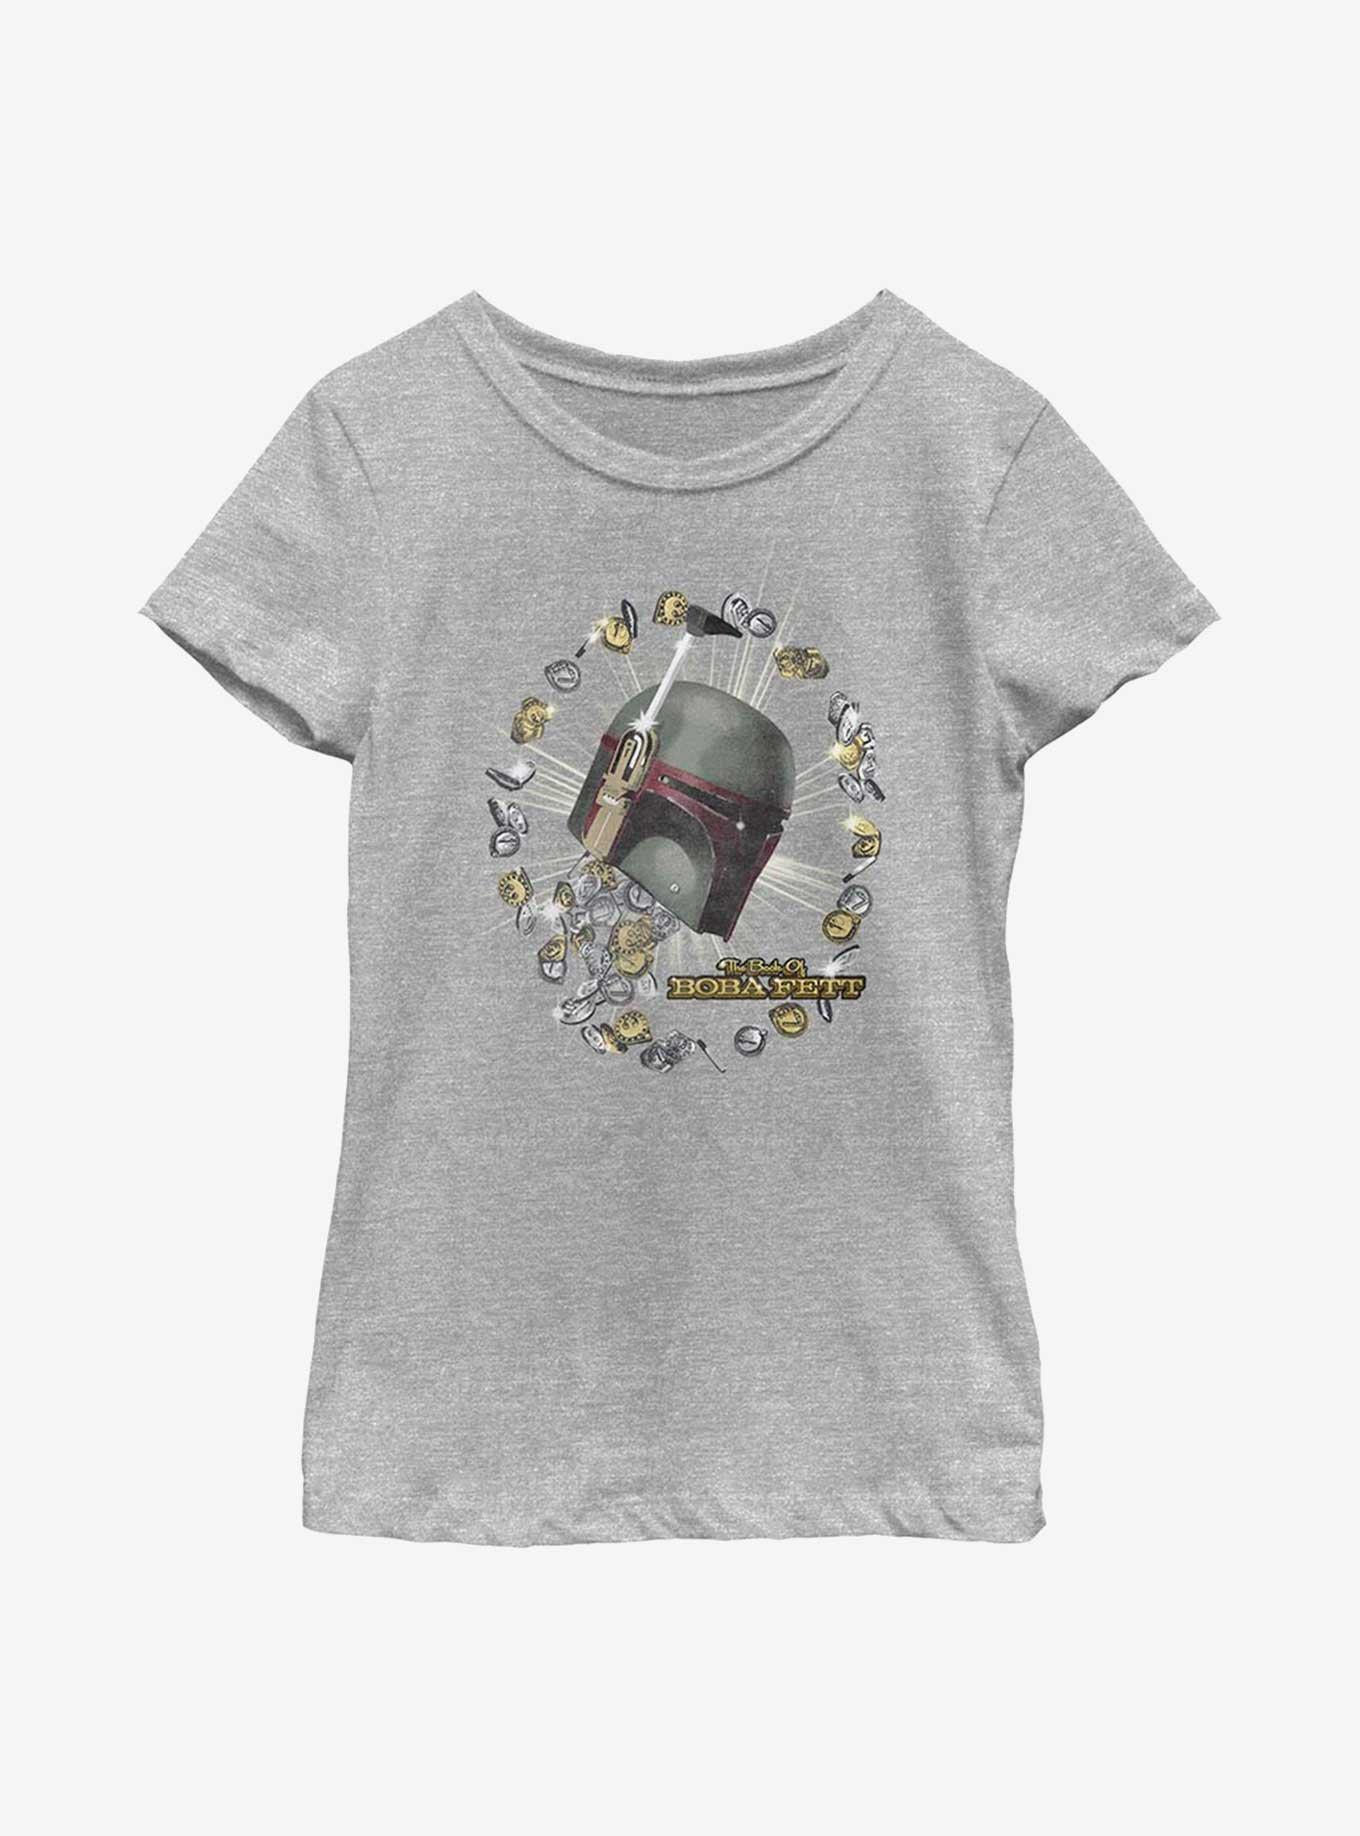 Star Wars The Book Of Boba Fett All About Credits Youth Girls T-Shirt, ATH HTR, hi-res